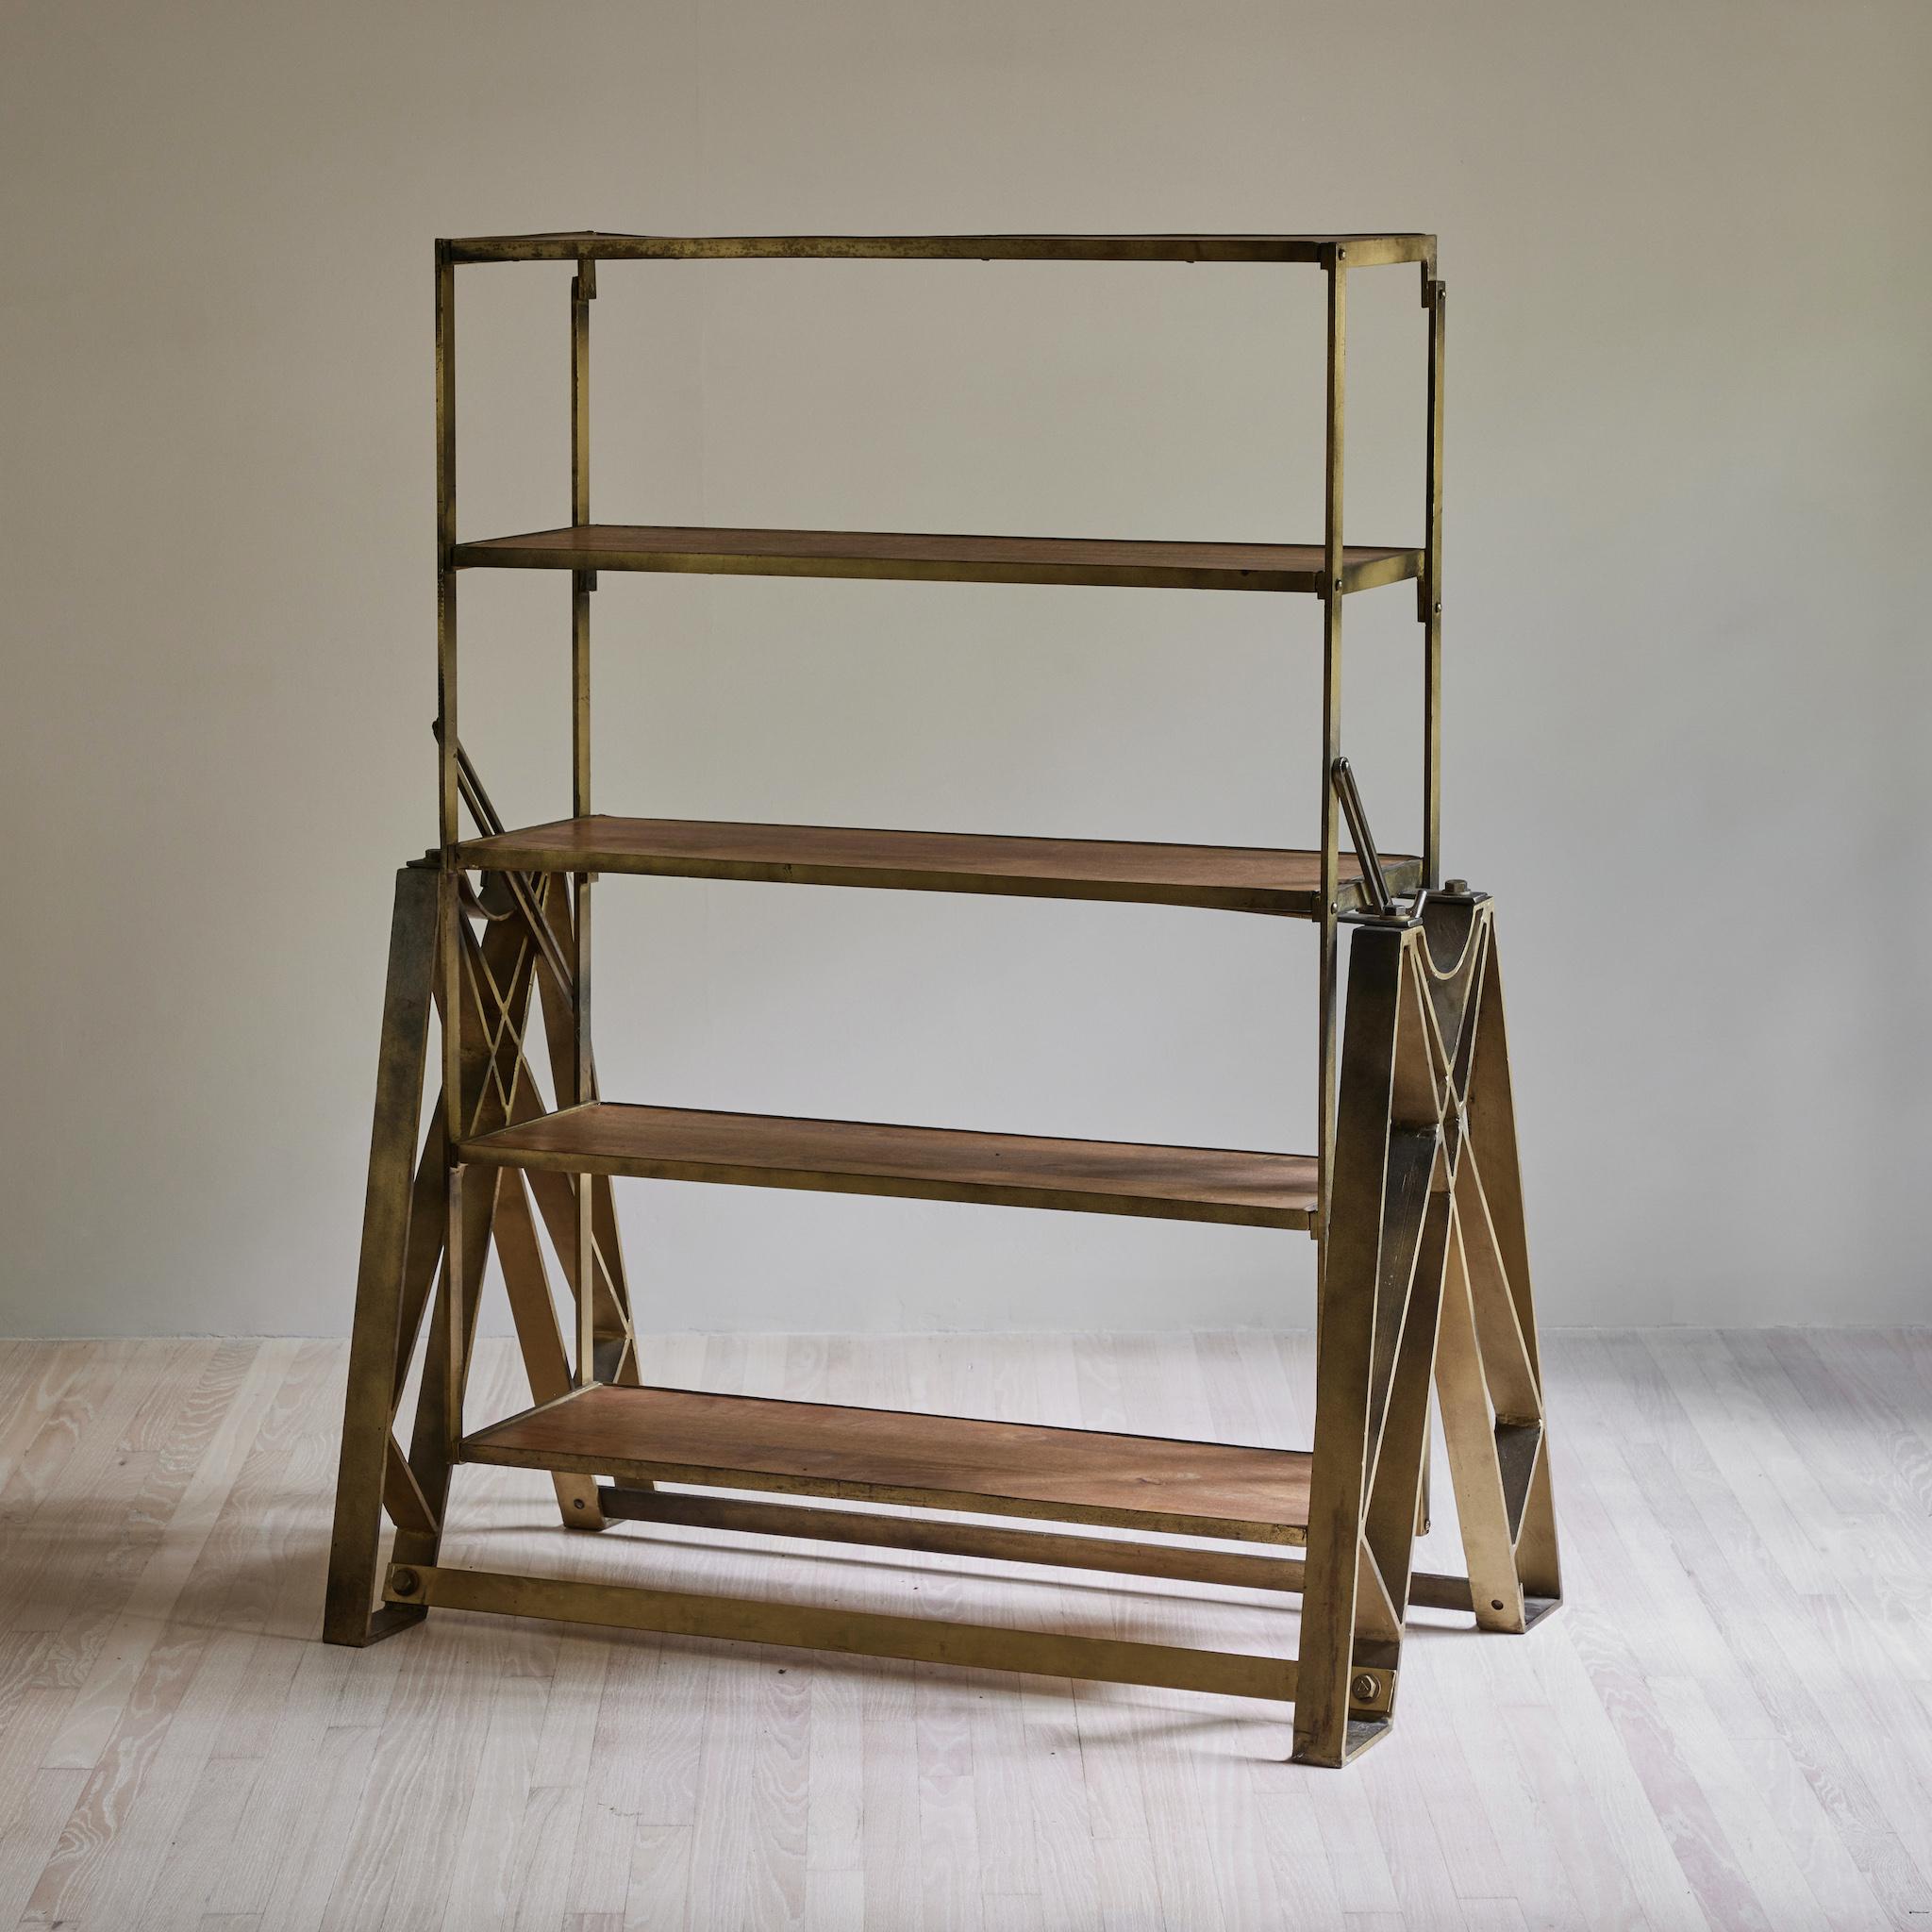 Turn-of-the-century English industrial shelves. A masterpiece of engineering, these stylish shelves can be adjusted to extend into a table. The sturdy metal framework supports five wood inserted shelves, which lie flush when extended as a tabletop.